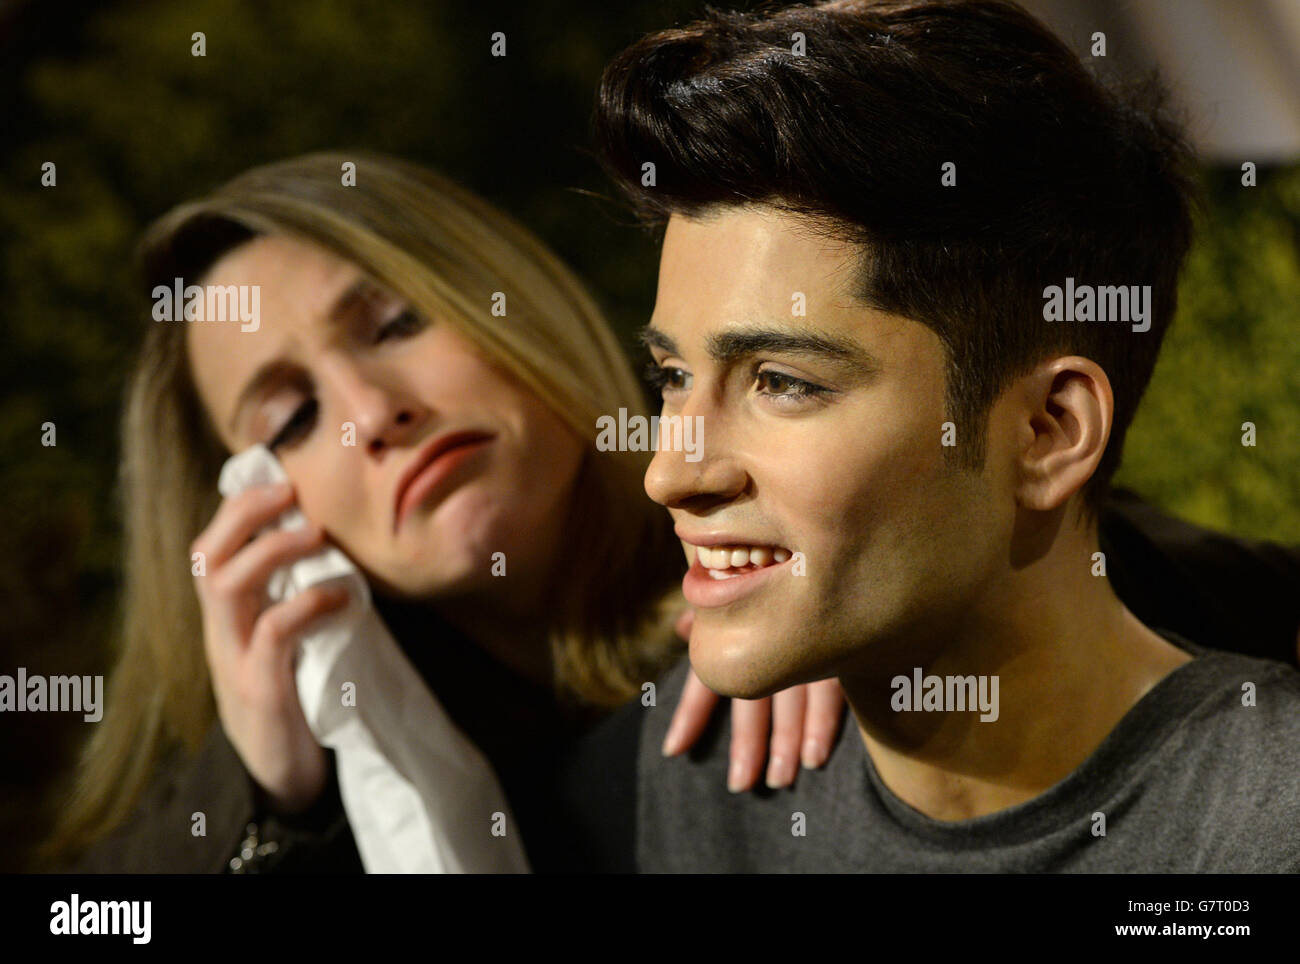 One Direction fan Lindsay Ringette appears upset while posing with the wax figure of former One Direction star Zayn Malik at Madame Tussauds, London. Stock Photo